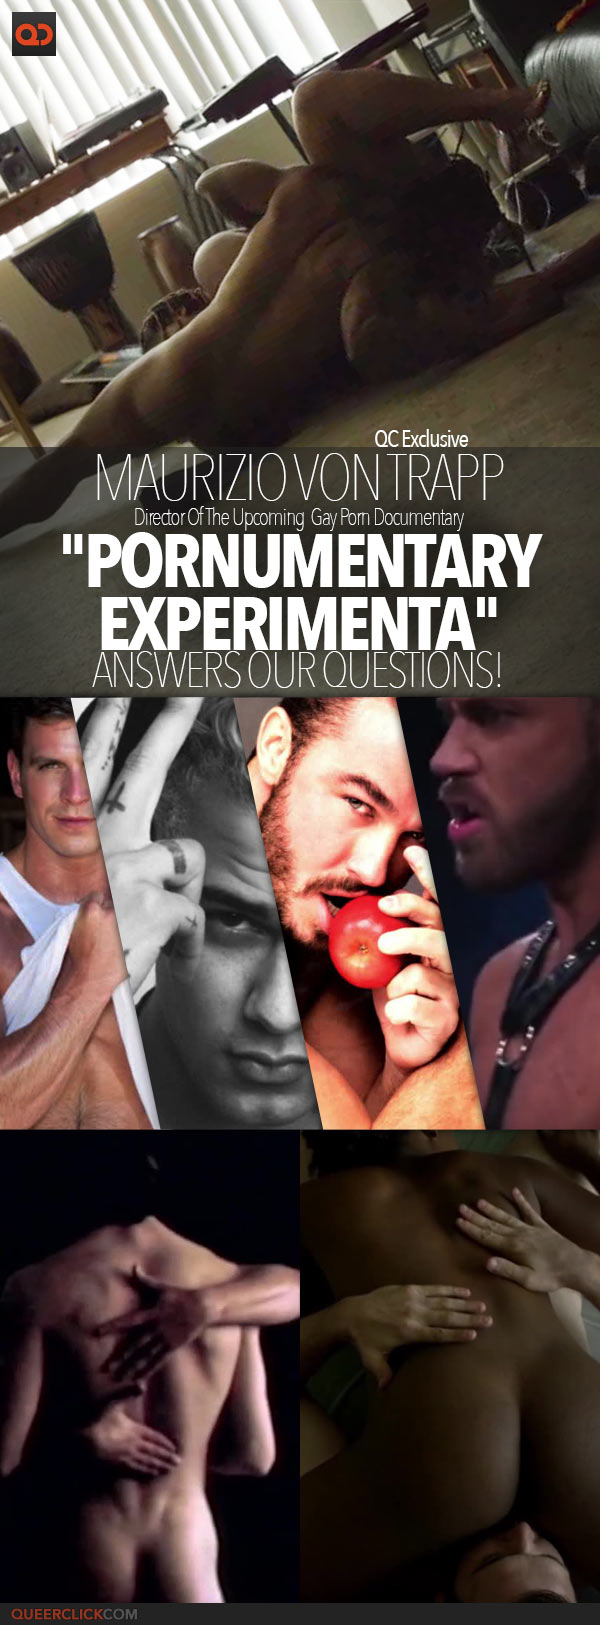 
QC Exclusive: Maurizio Von Trapp, Director Of The Upcoming Gay Porn Documentary “Pornumentary Experimenta”, Answer Our Questions!